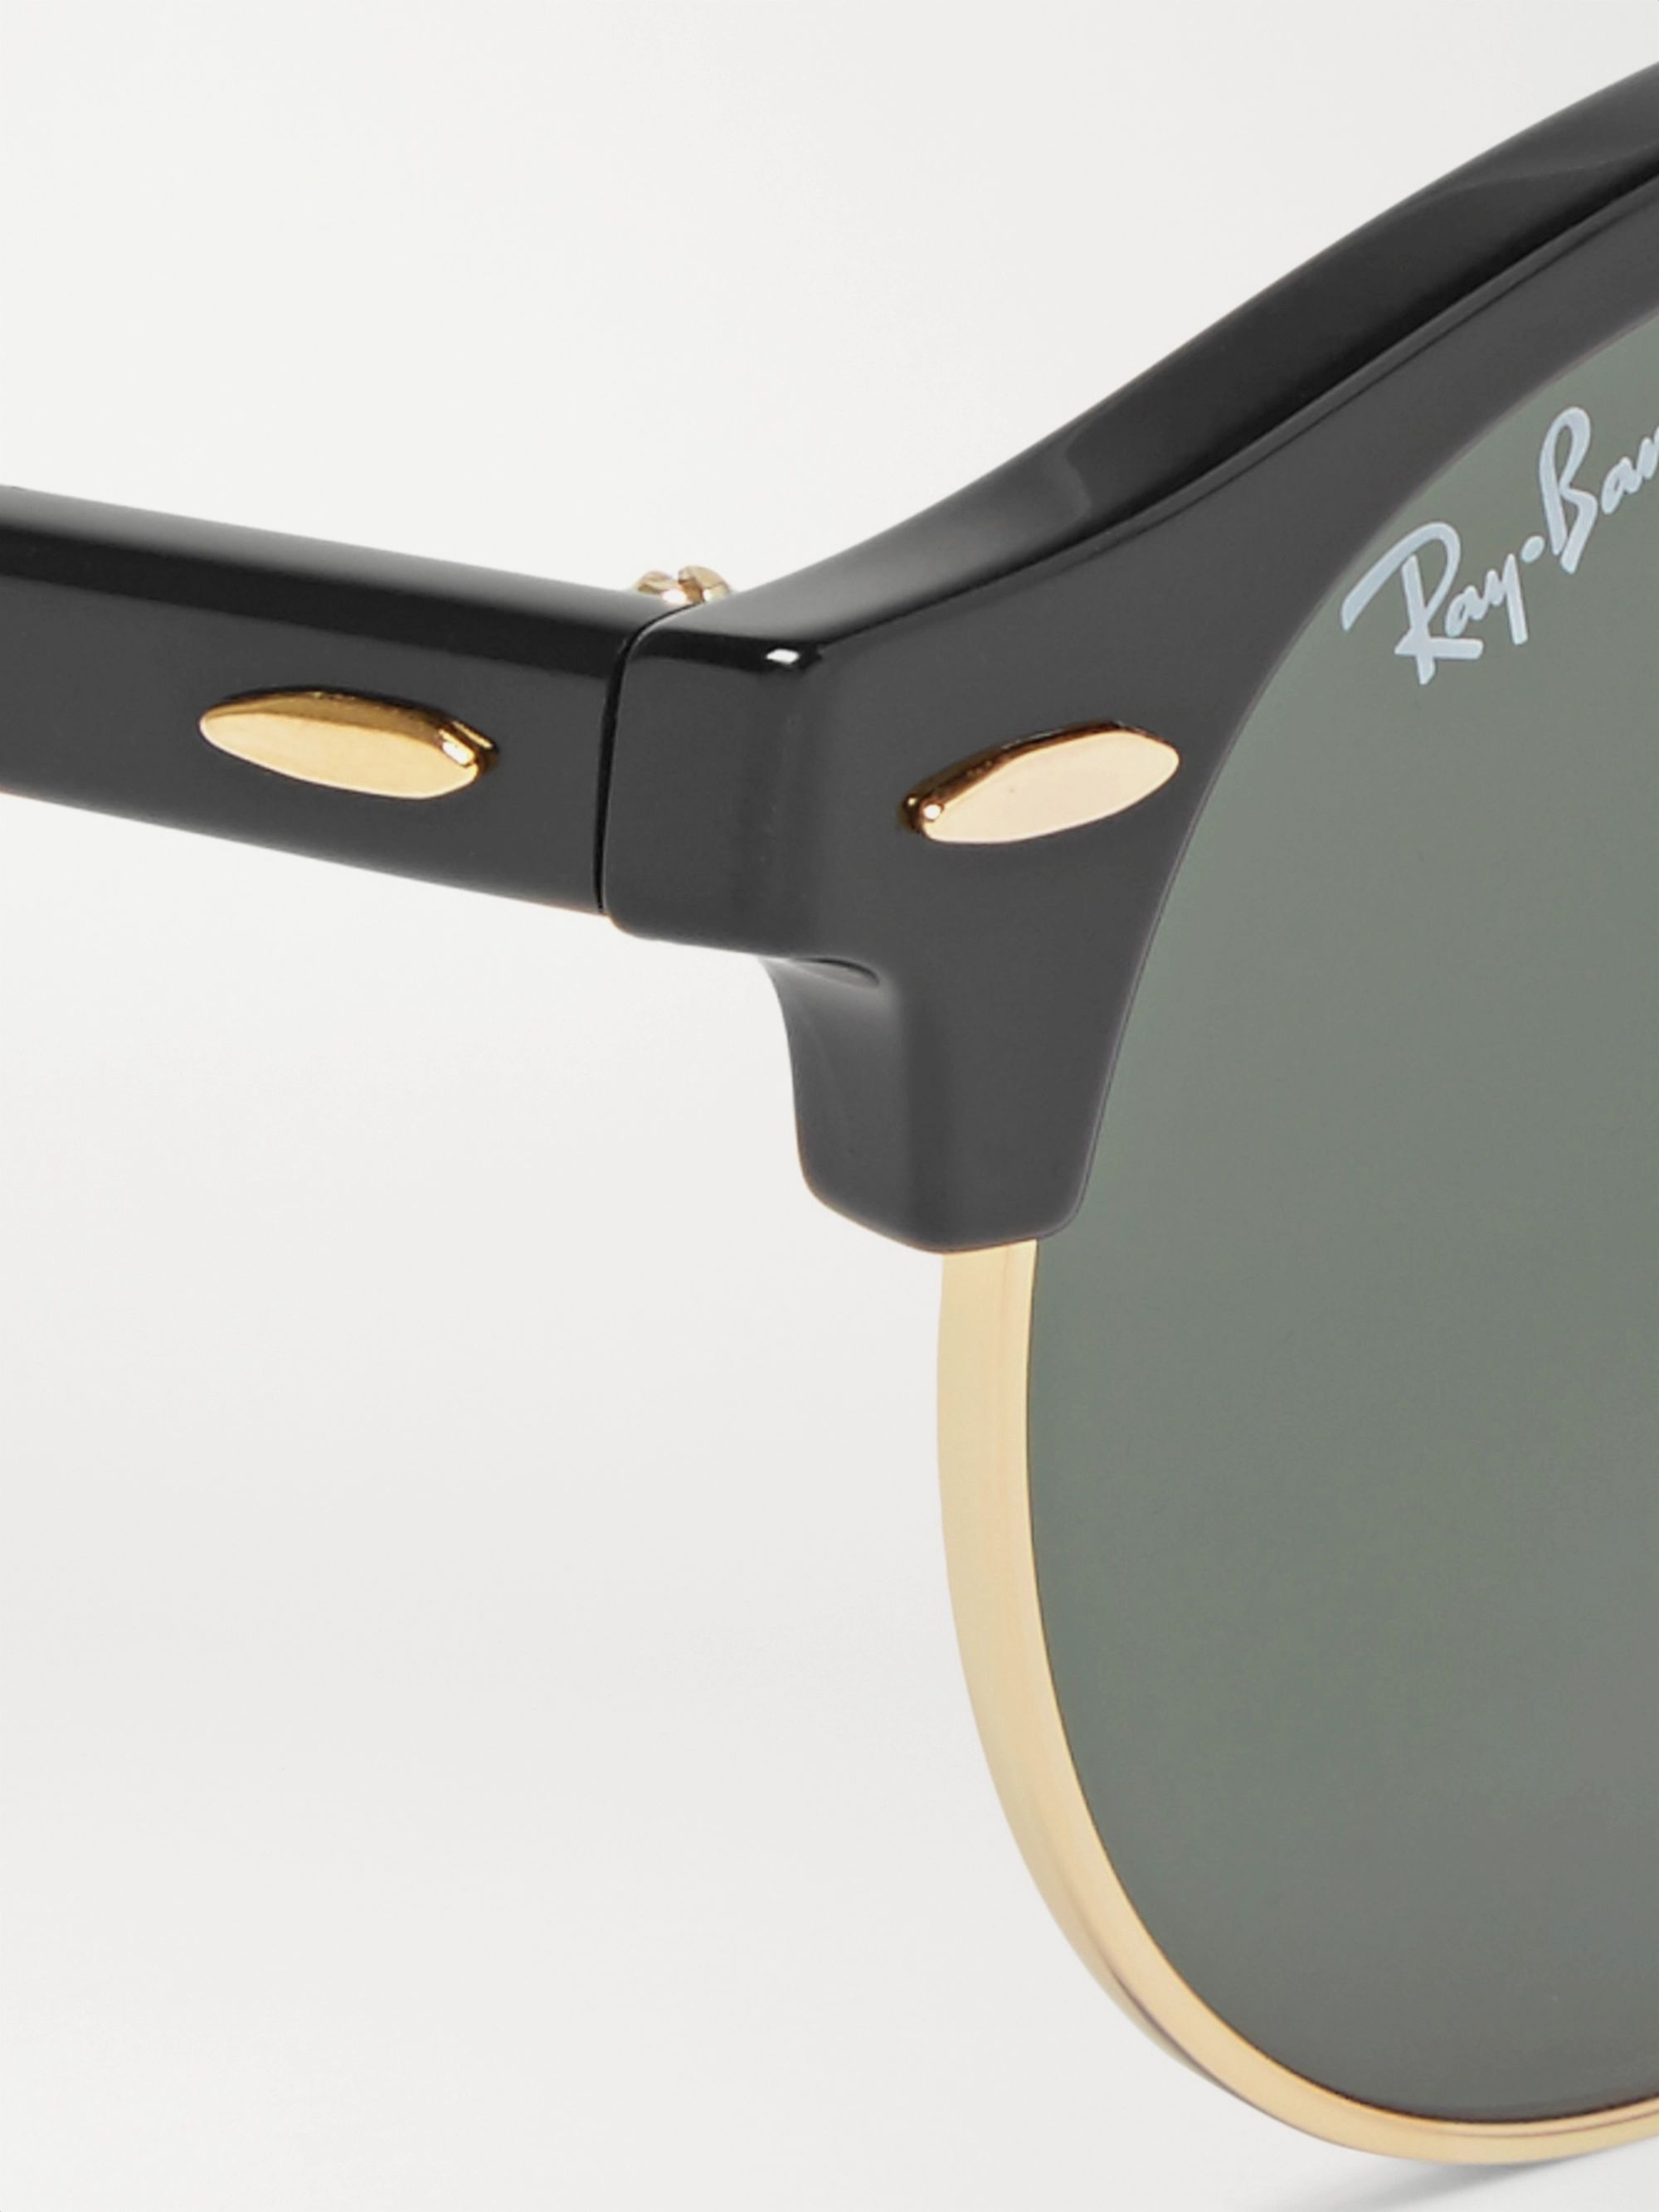 Ray Ban Clubmaster Round Polarized For Sale Off 70